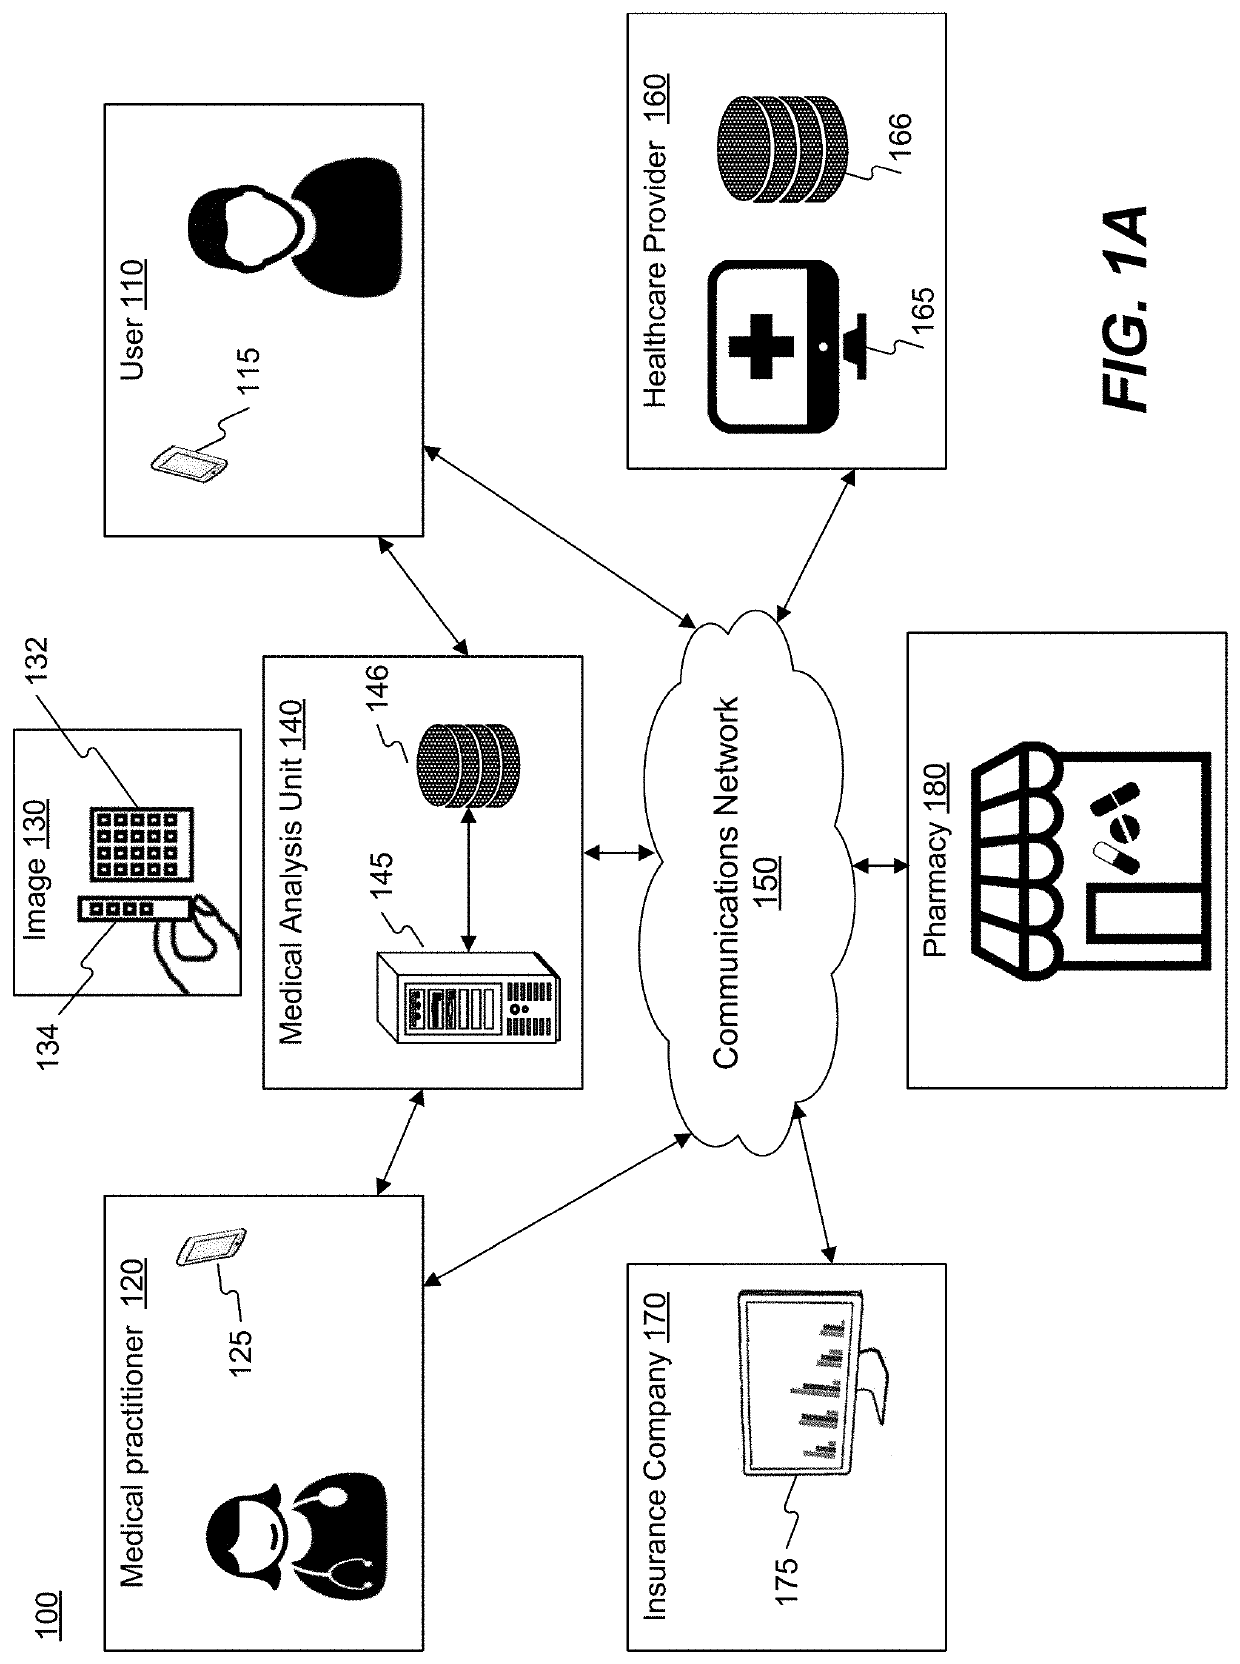 Systems and methods for urinalysis using a personal communications device